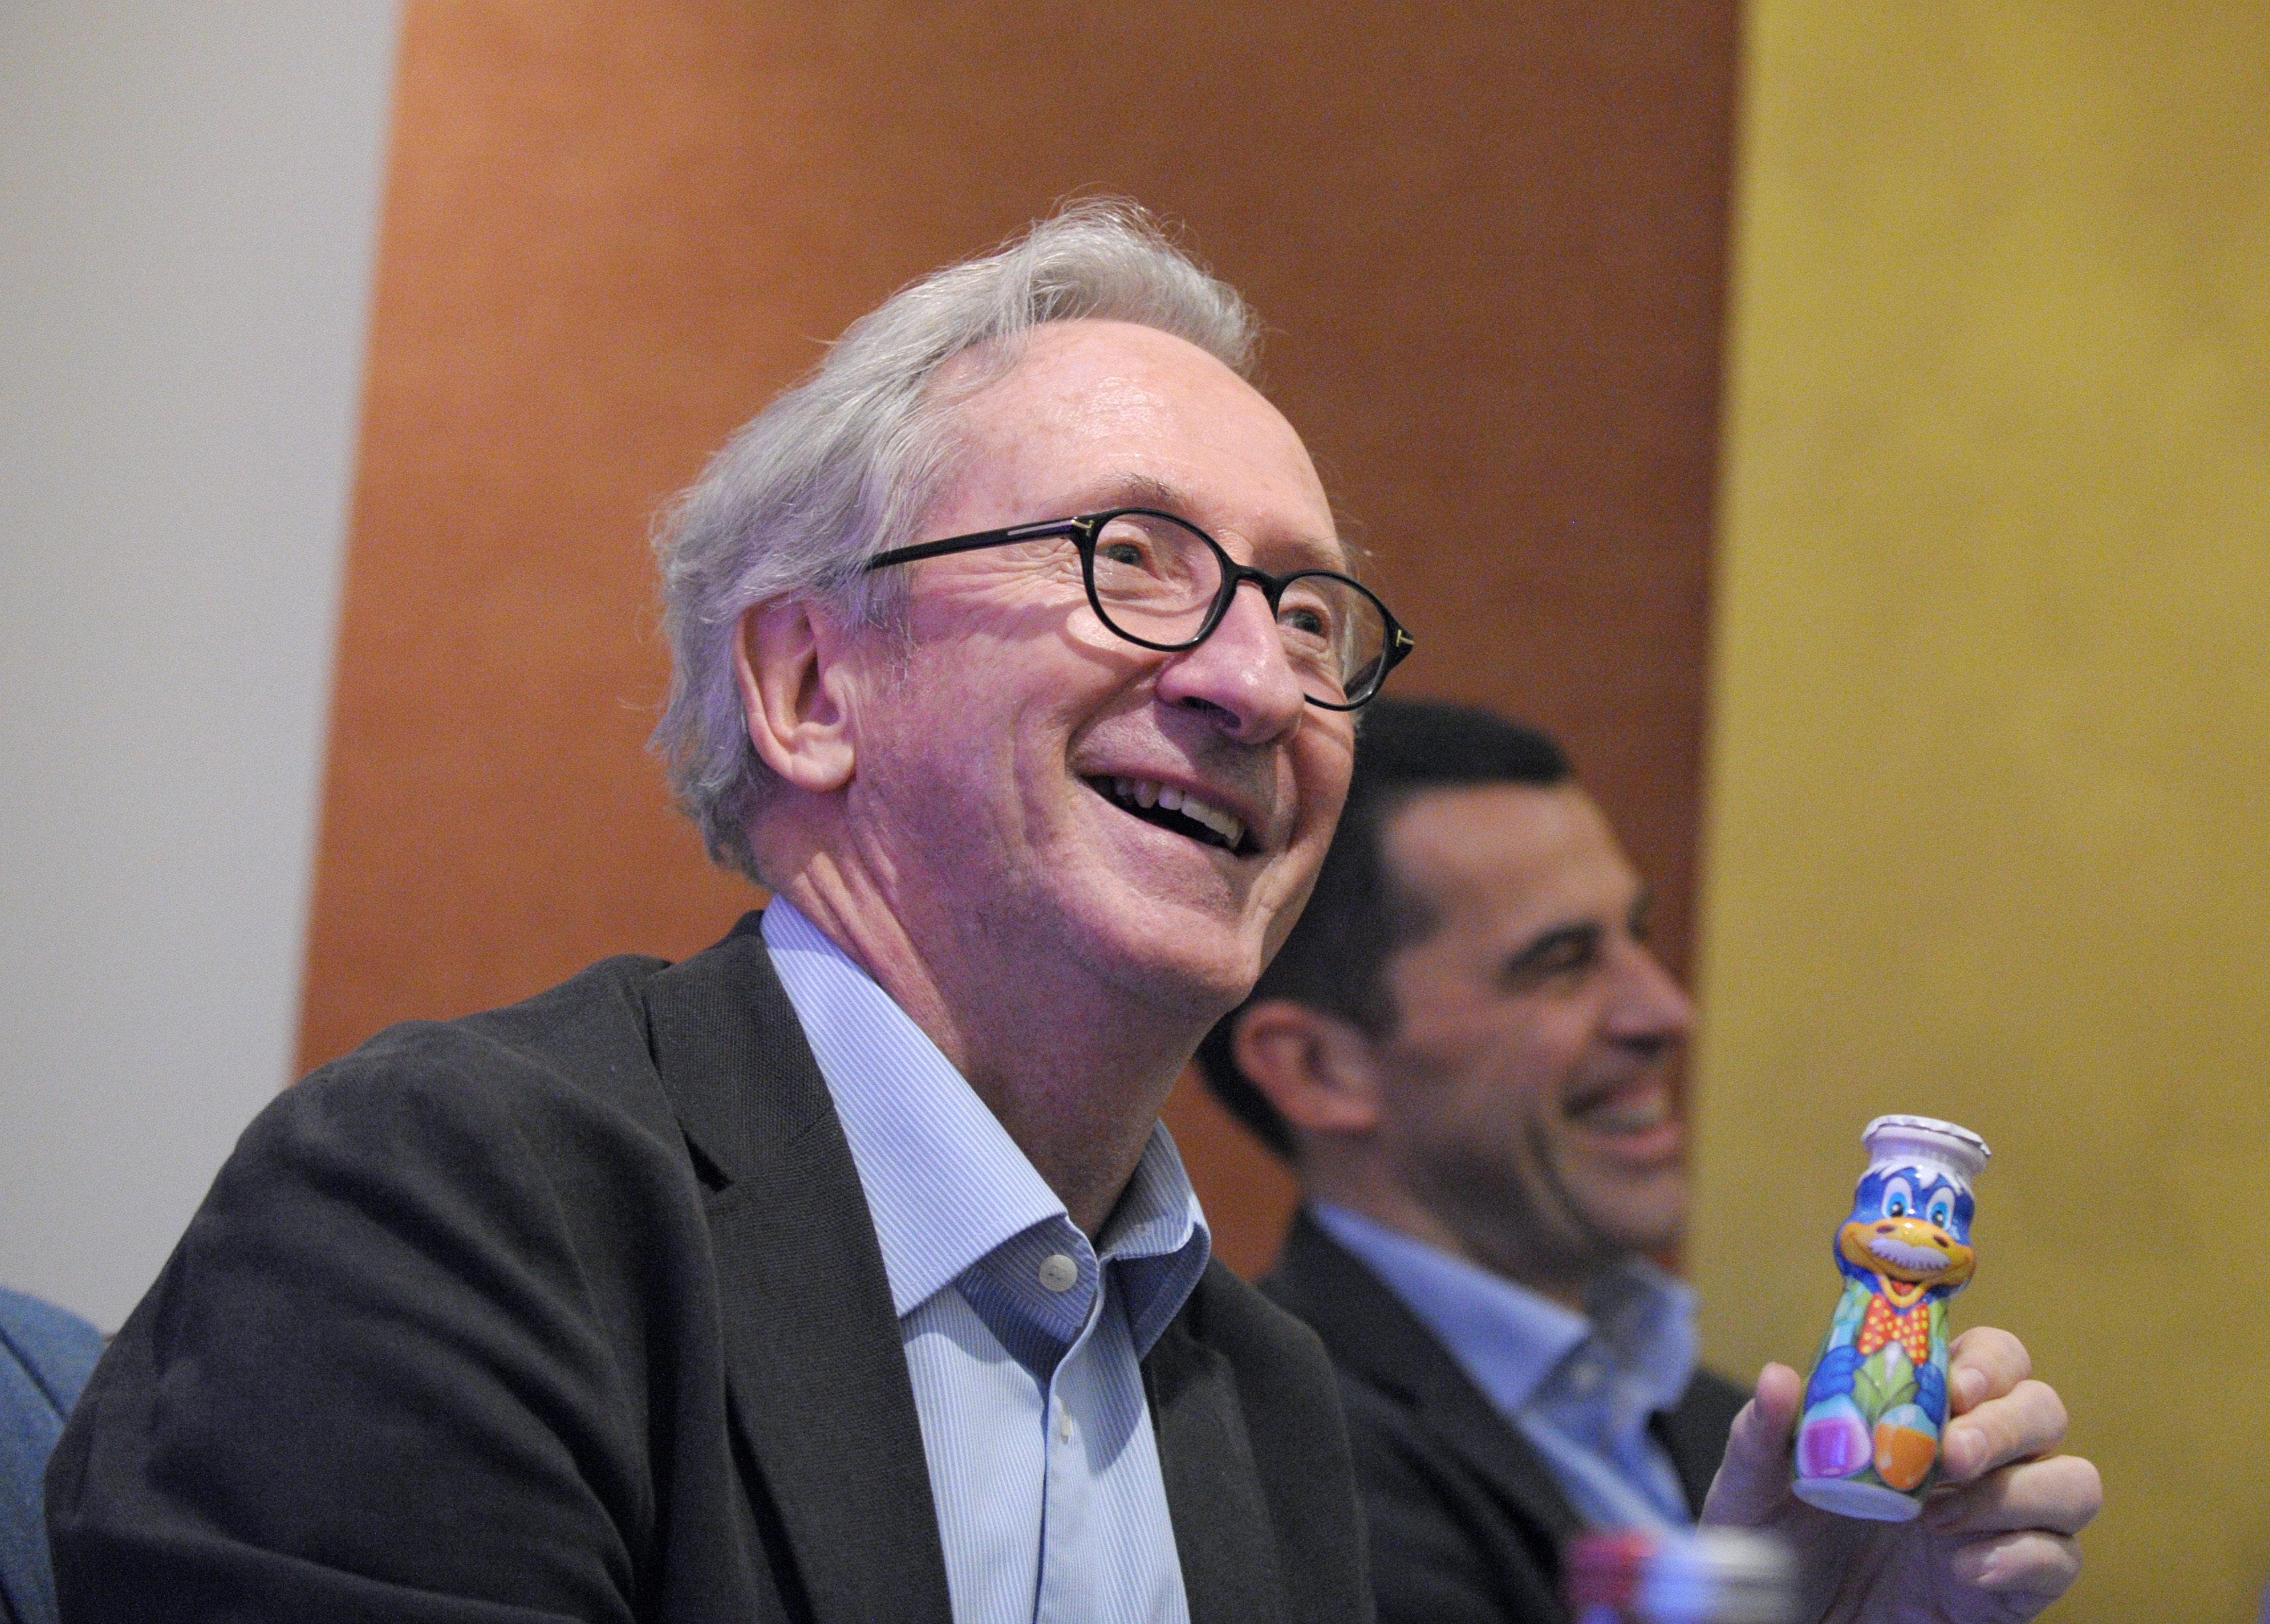 FRANCE, Paris : French dairy food giant Danone Chairman Franck Riboud smiles during a press conference to present the group's 2013 results in Paris on February 20, 2014.